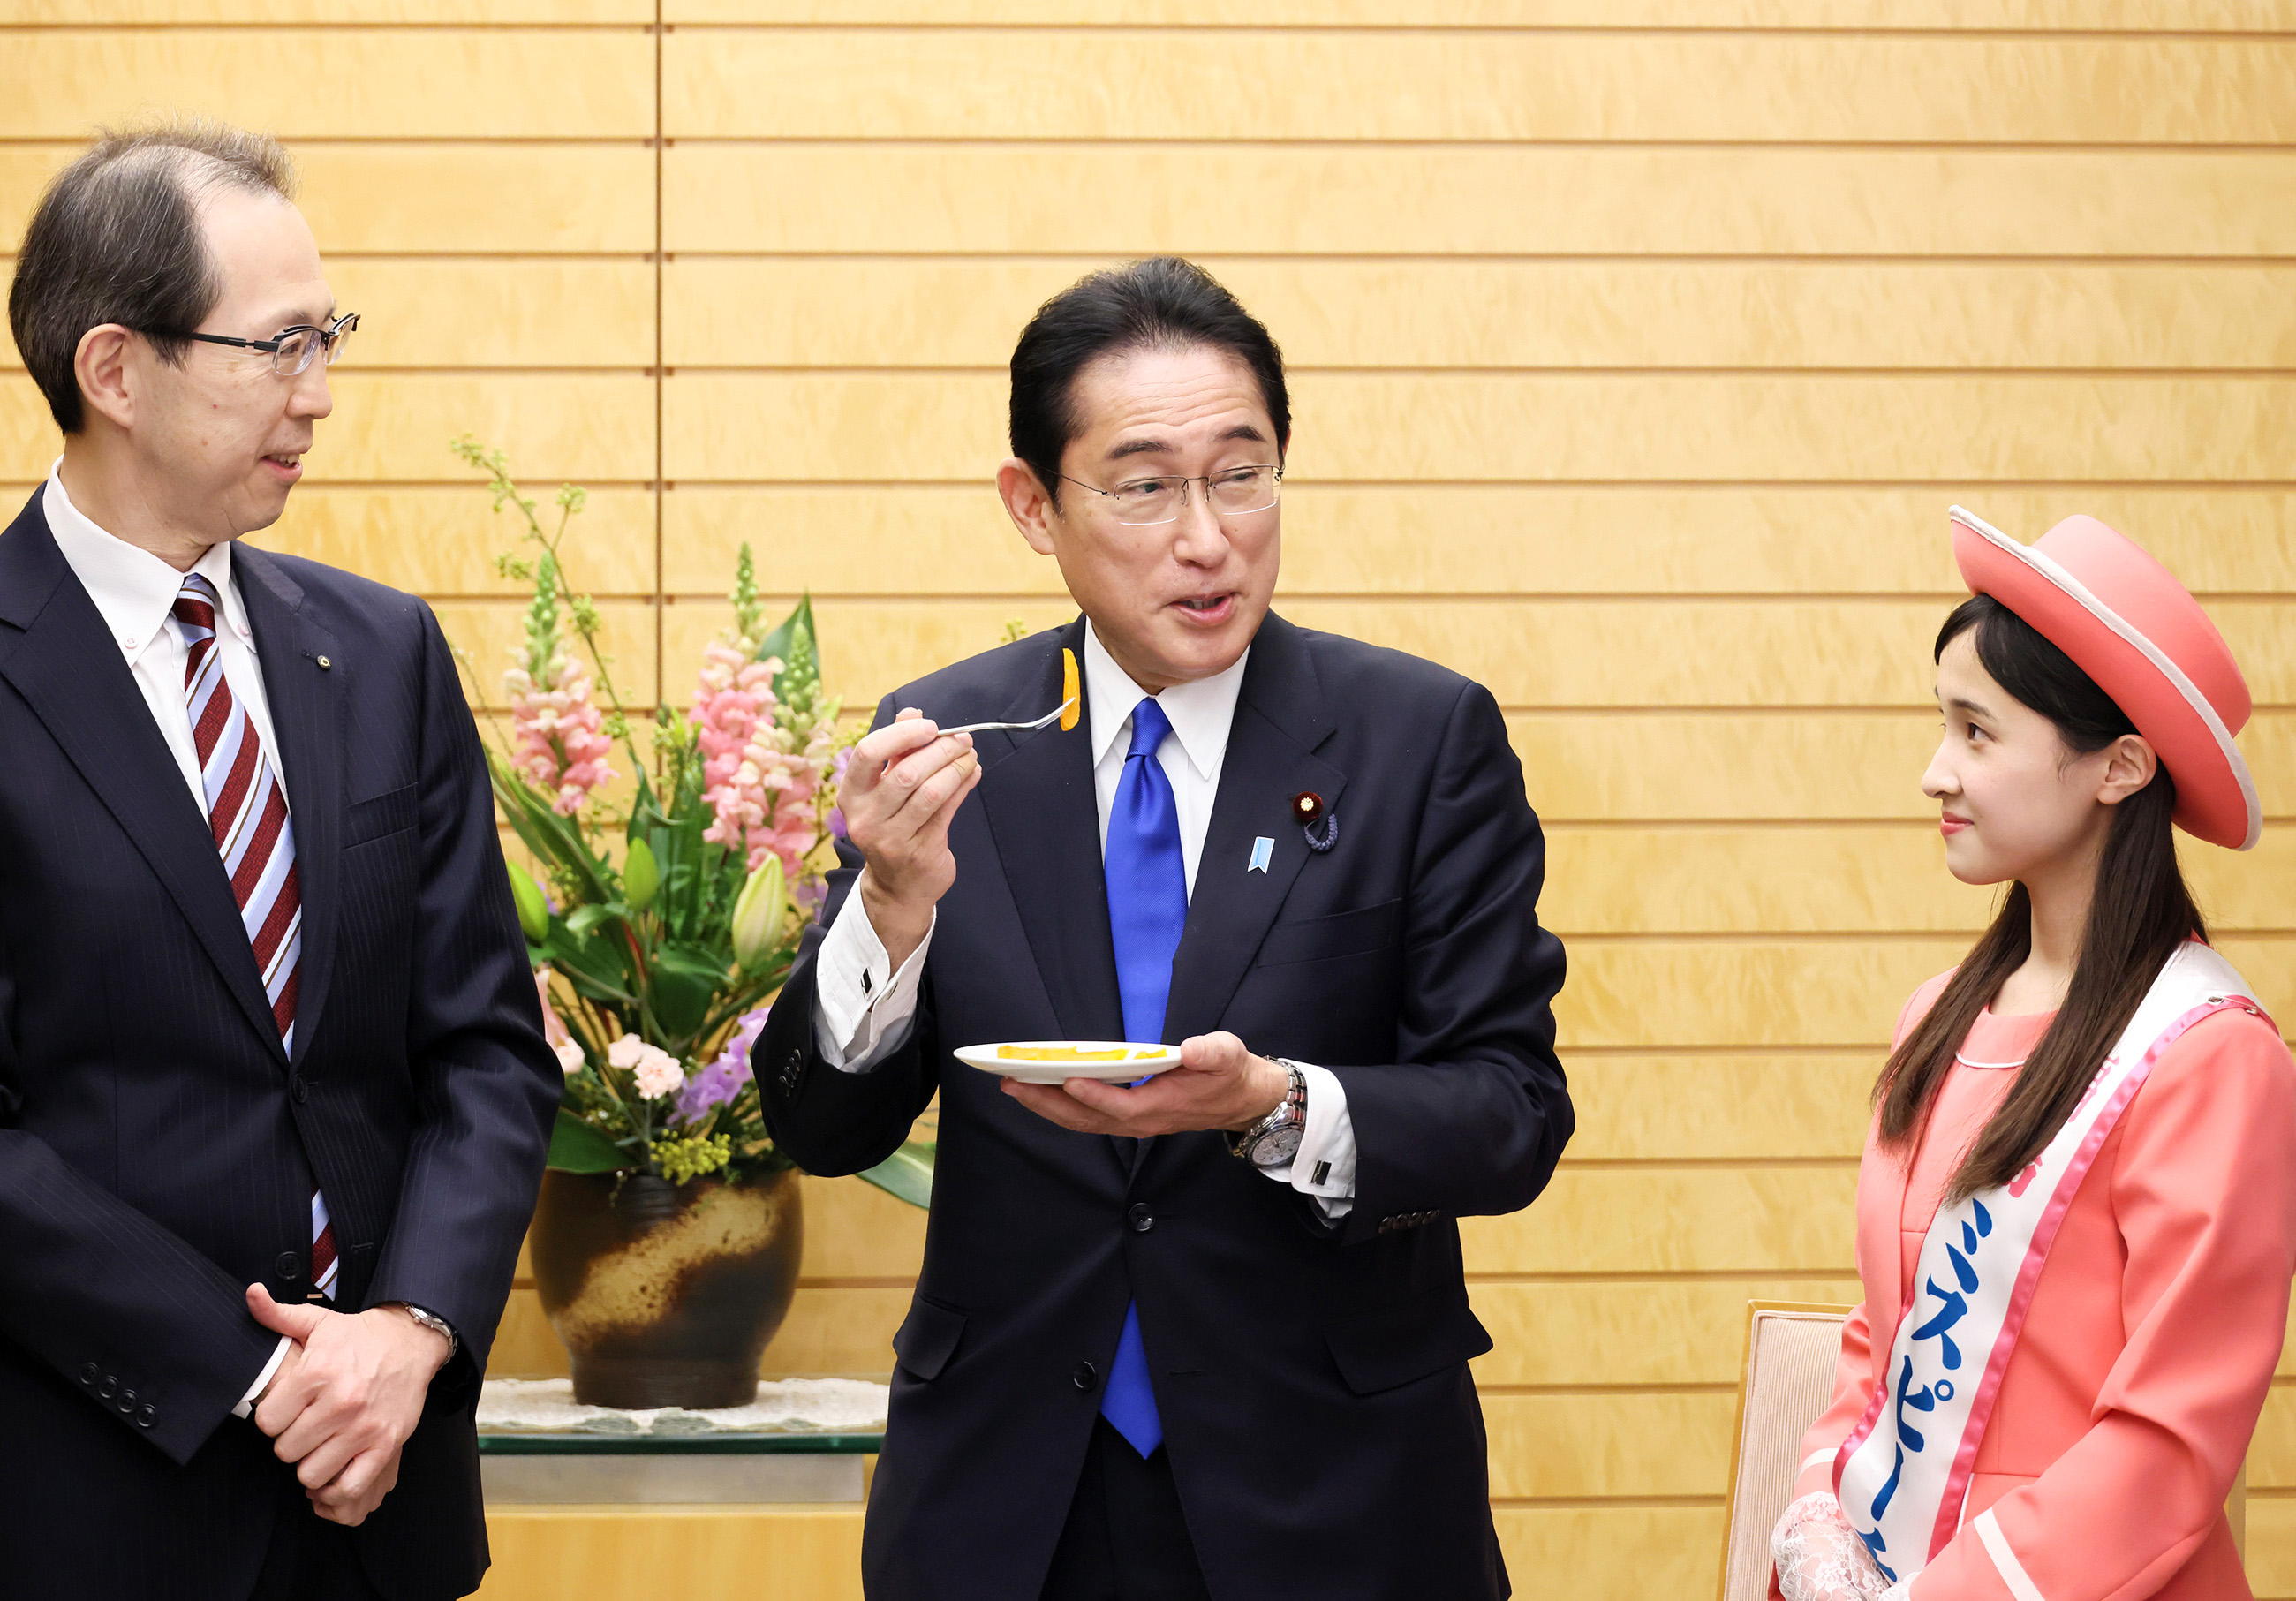 Prime Minister Kishida being presented with Anpo persimmons and receiving a courtesy call (3)